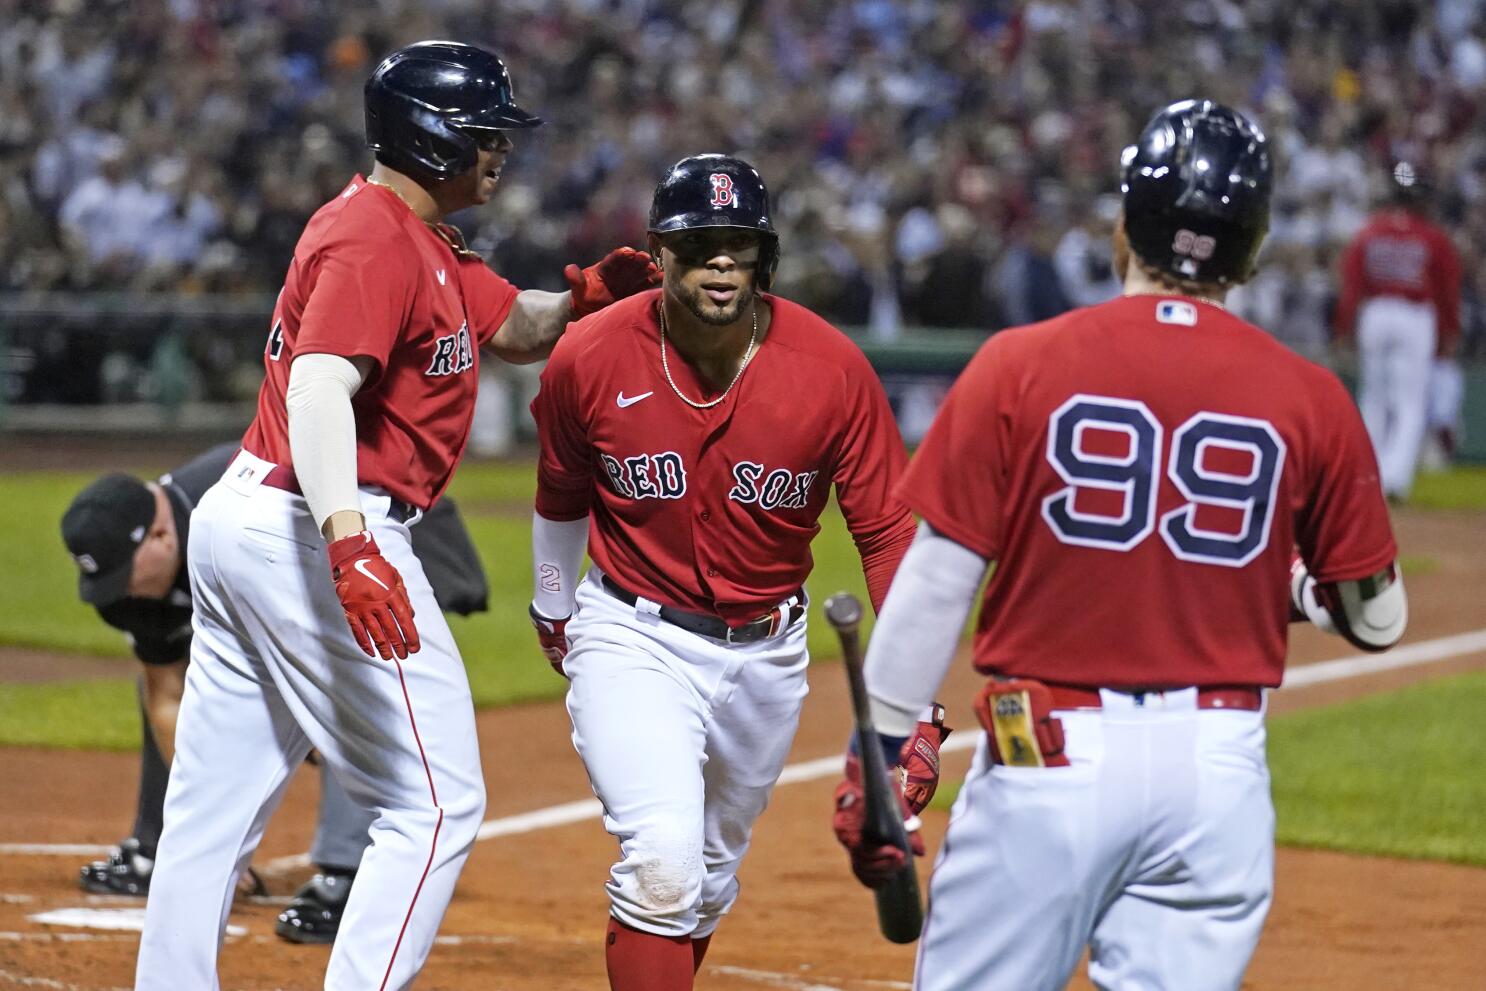 Rafael Devers' two home runs off Gerrit Cole not enough as Red Sox